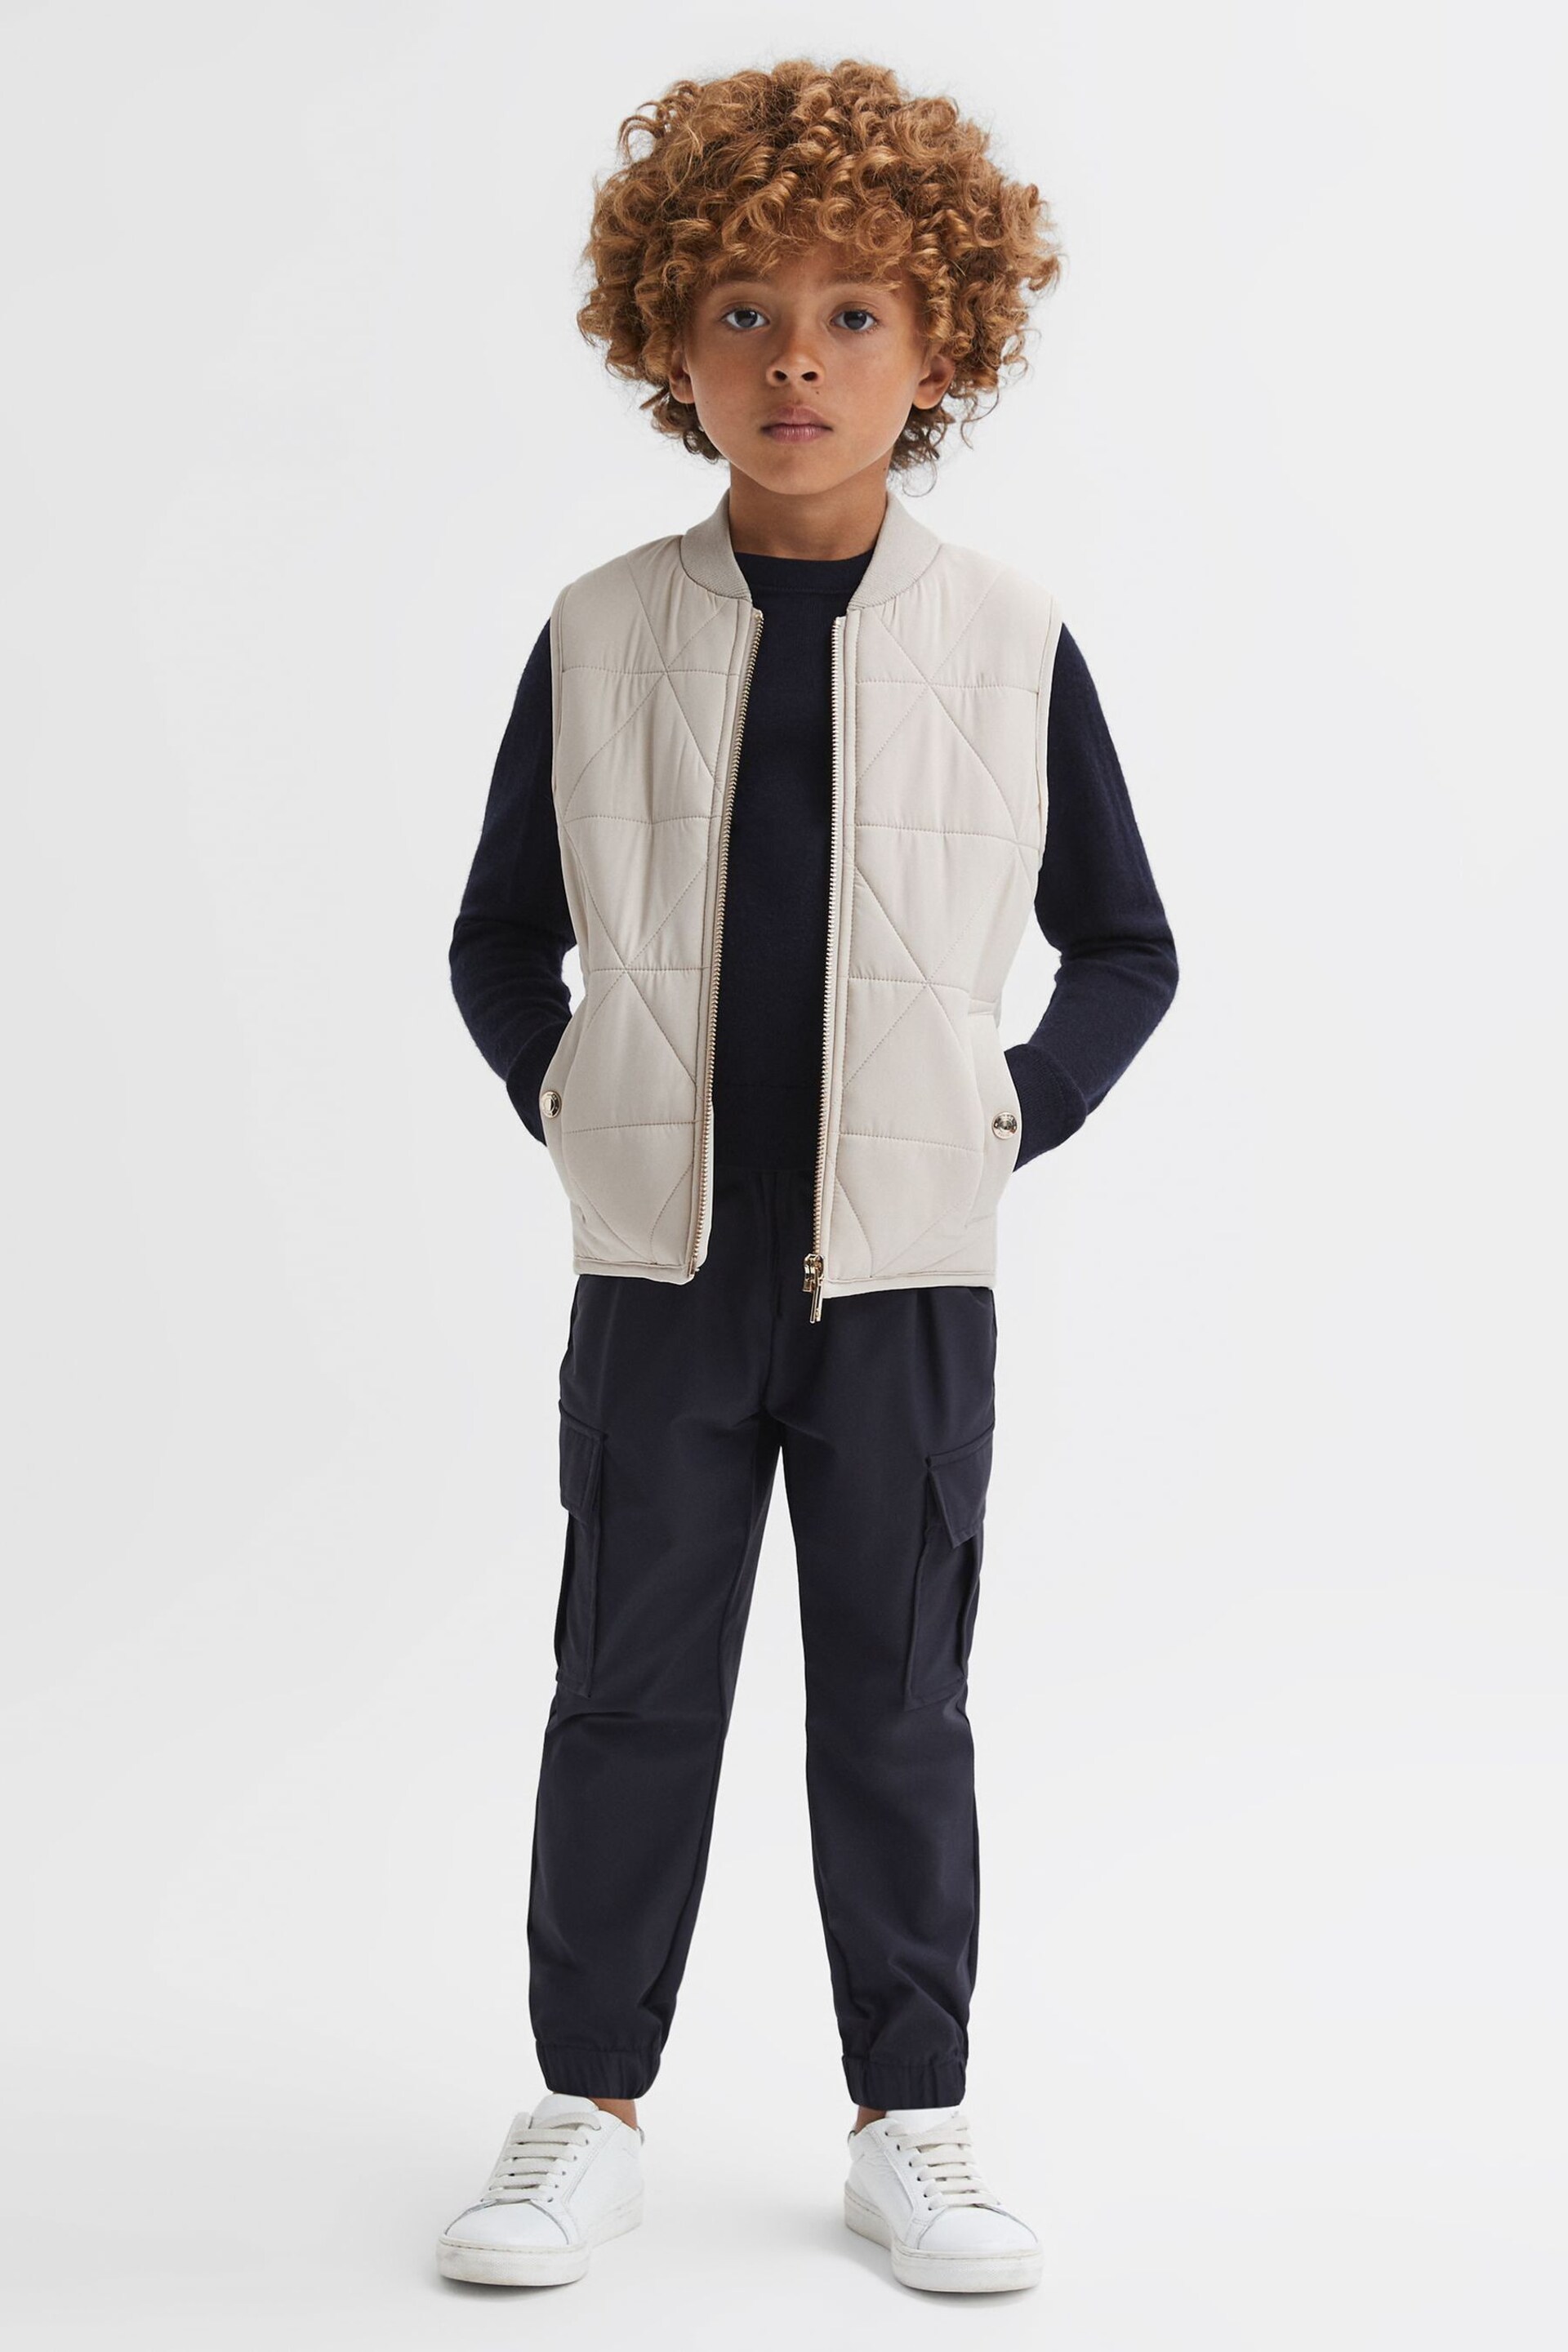 Reiss Stone Ritchie Senior Hybrid Knitted-Quilted Gilet - Image 1 of 5